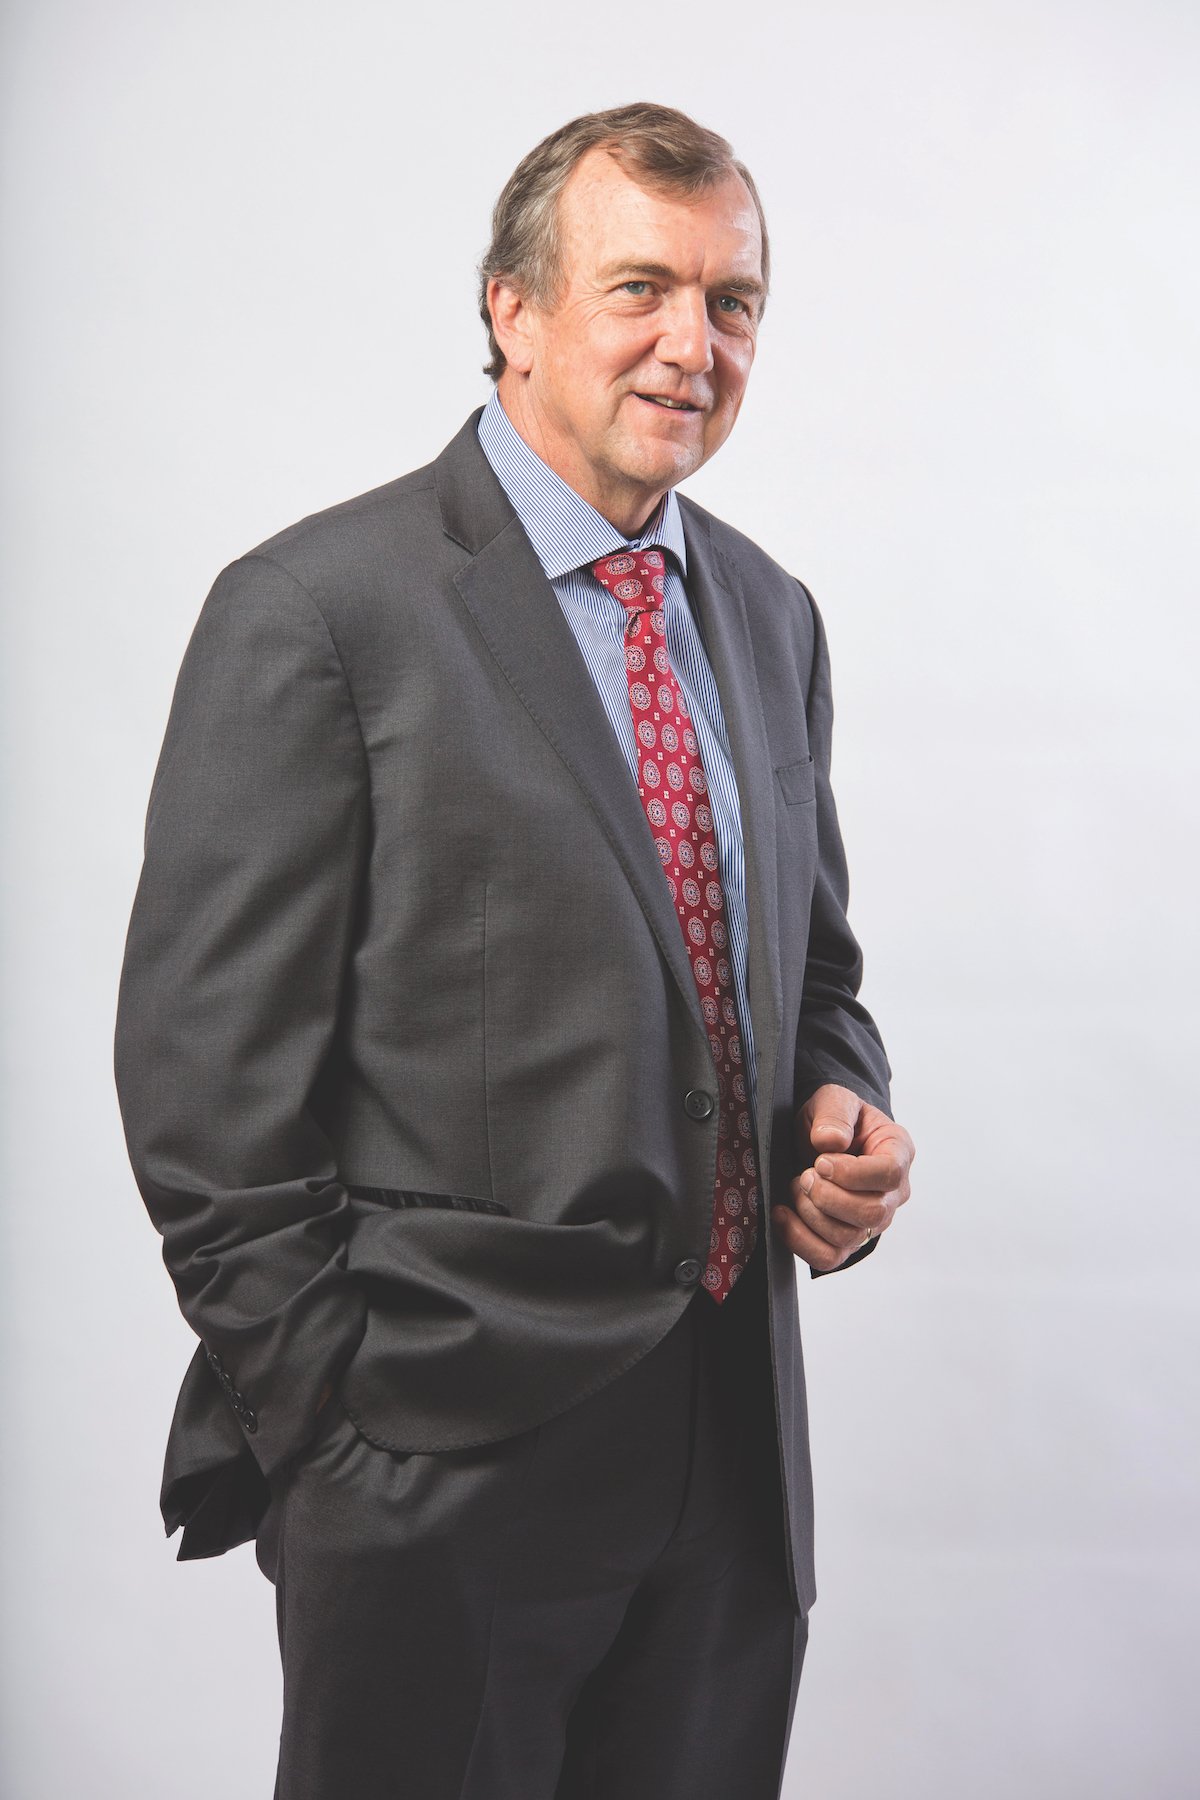 Mark Bristow, CEO of Randgold Resources